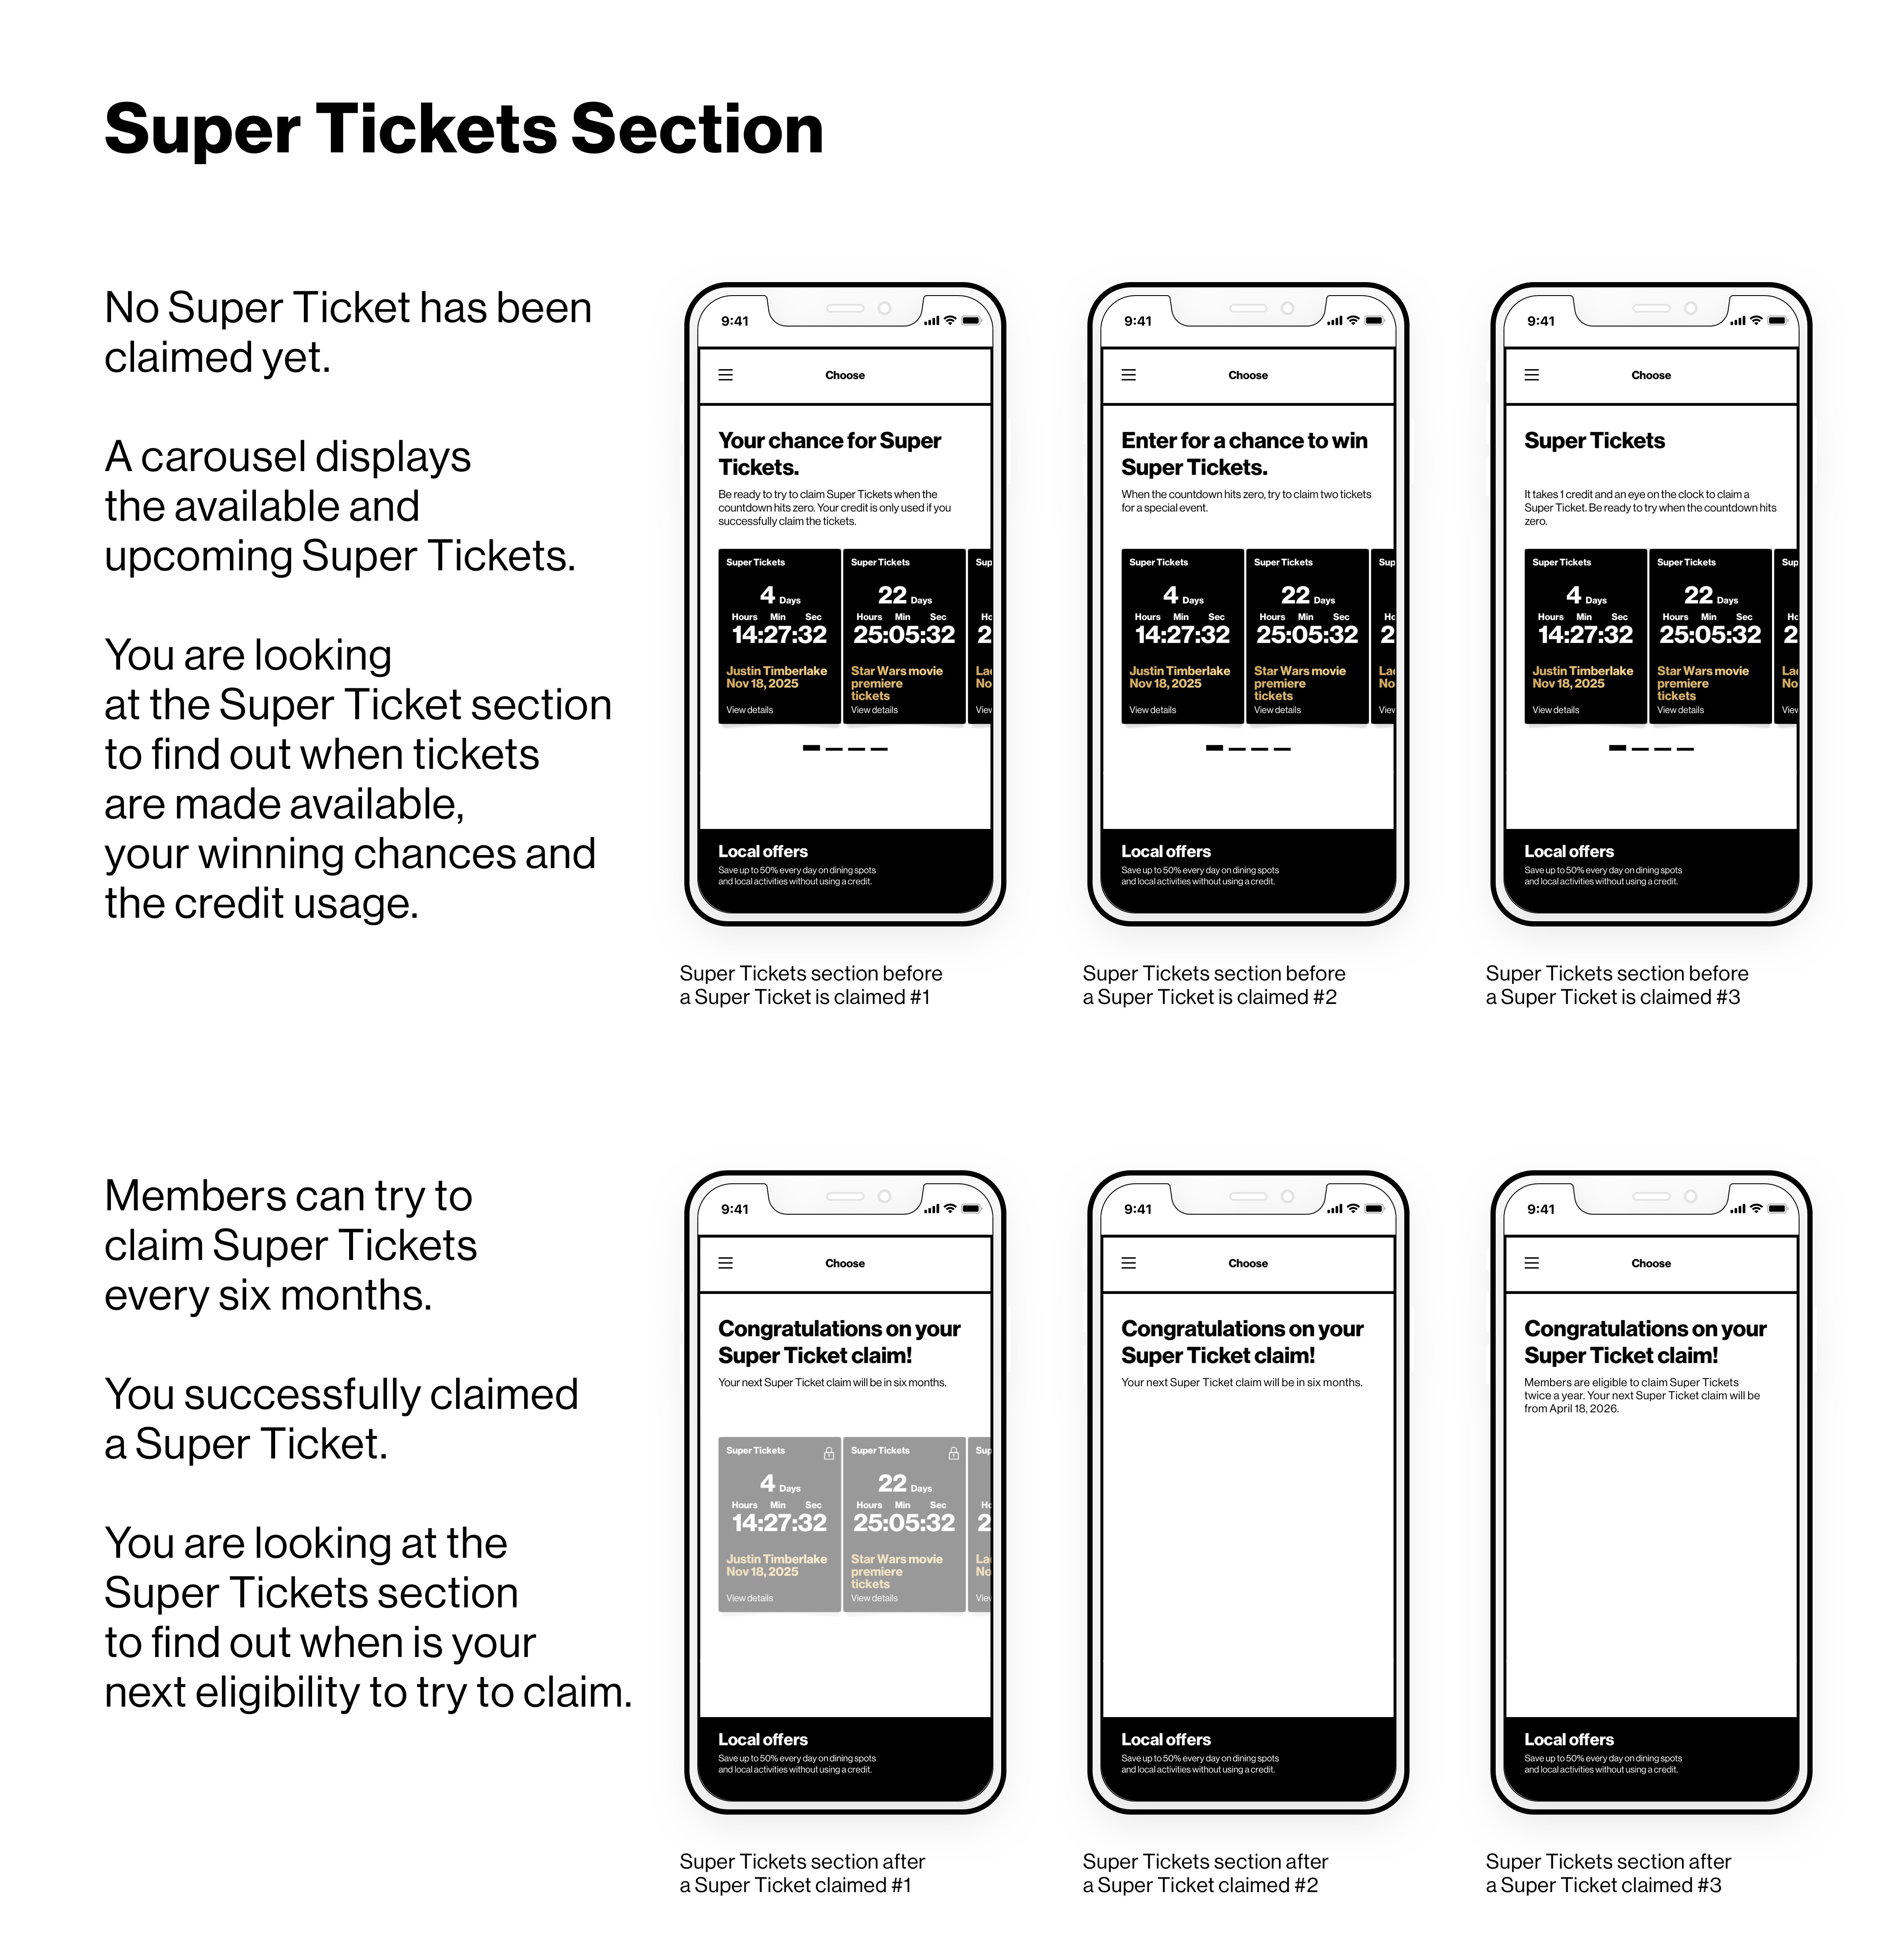 Super Tickets Section